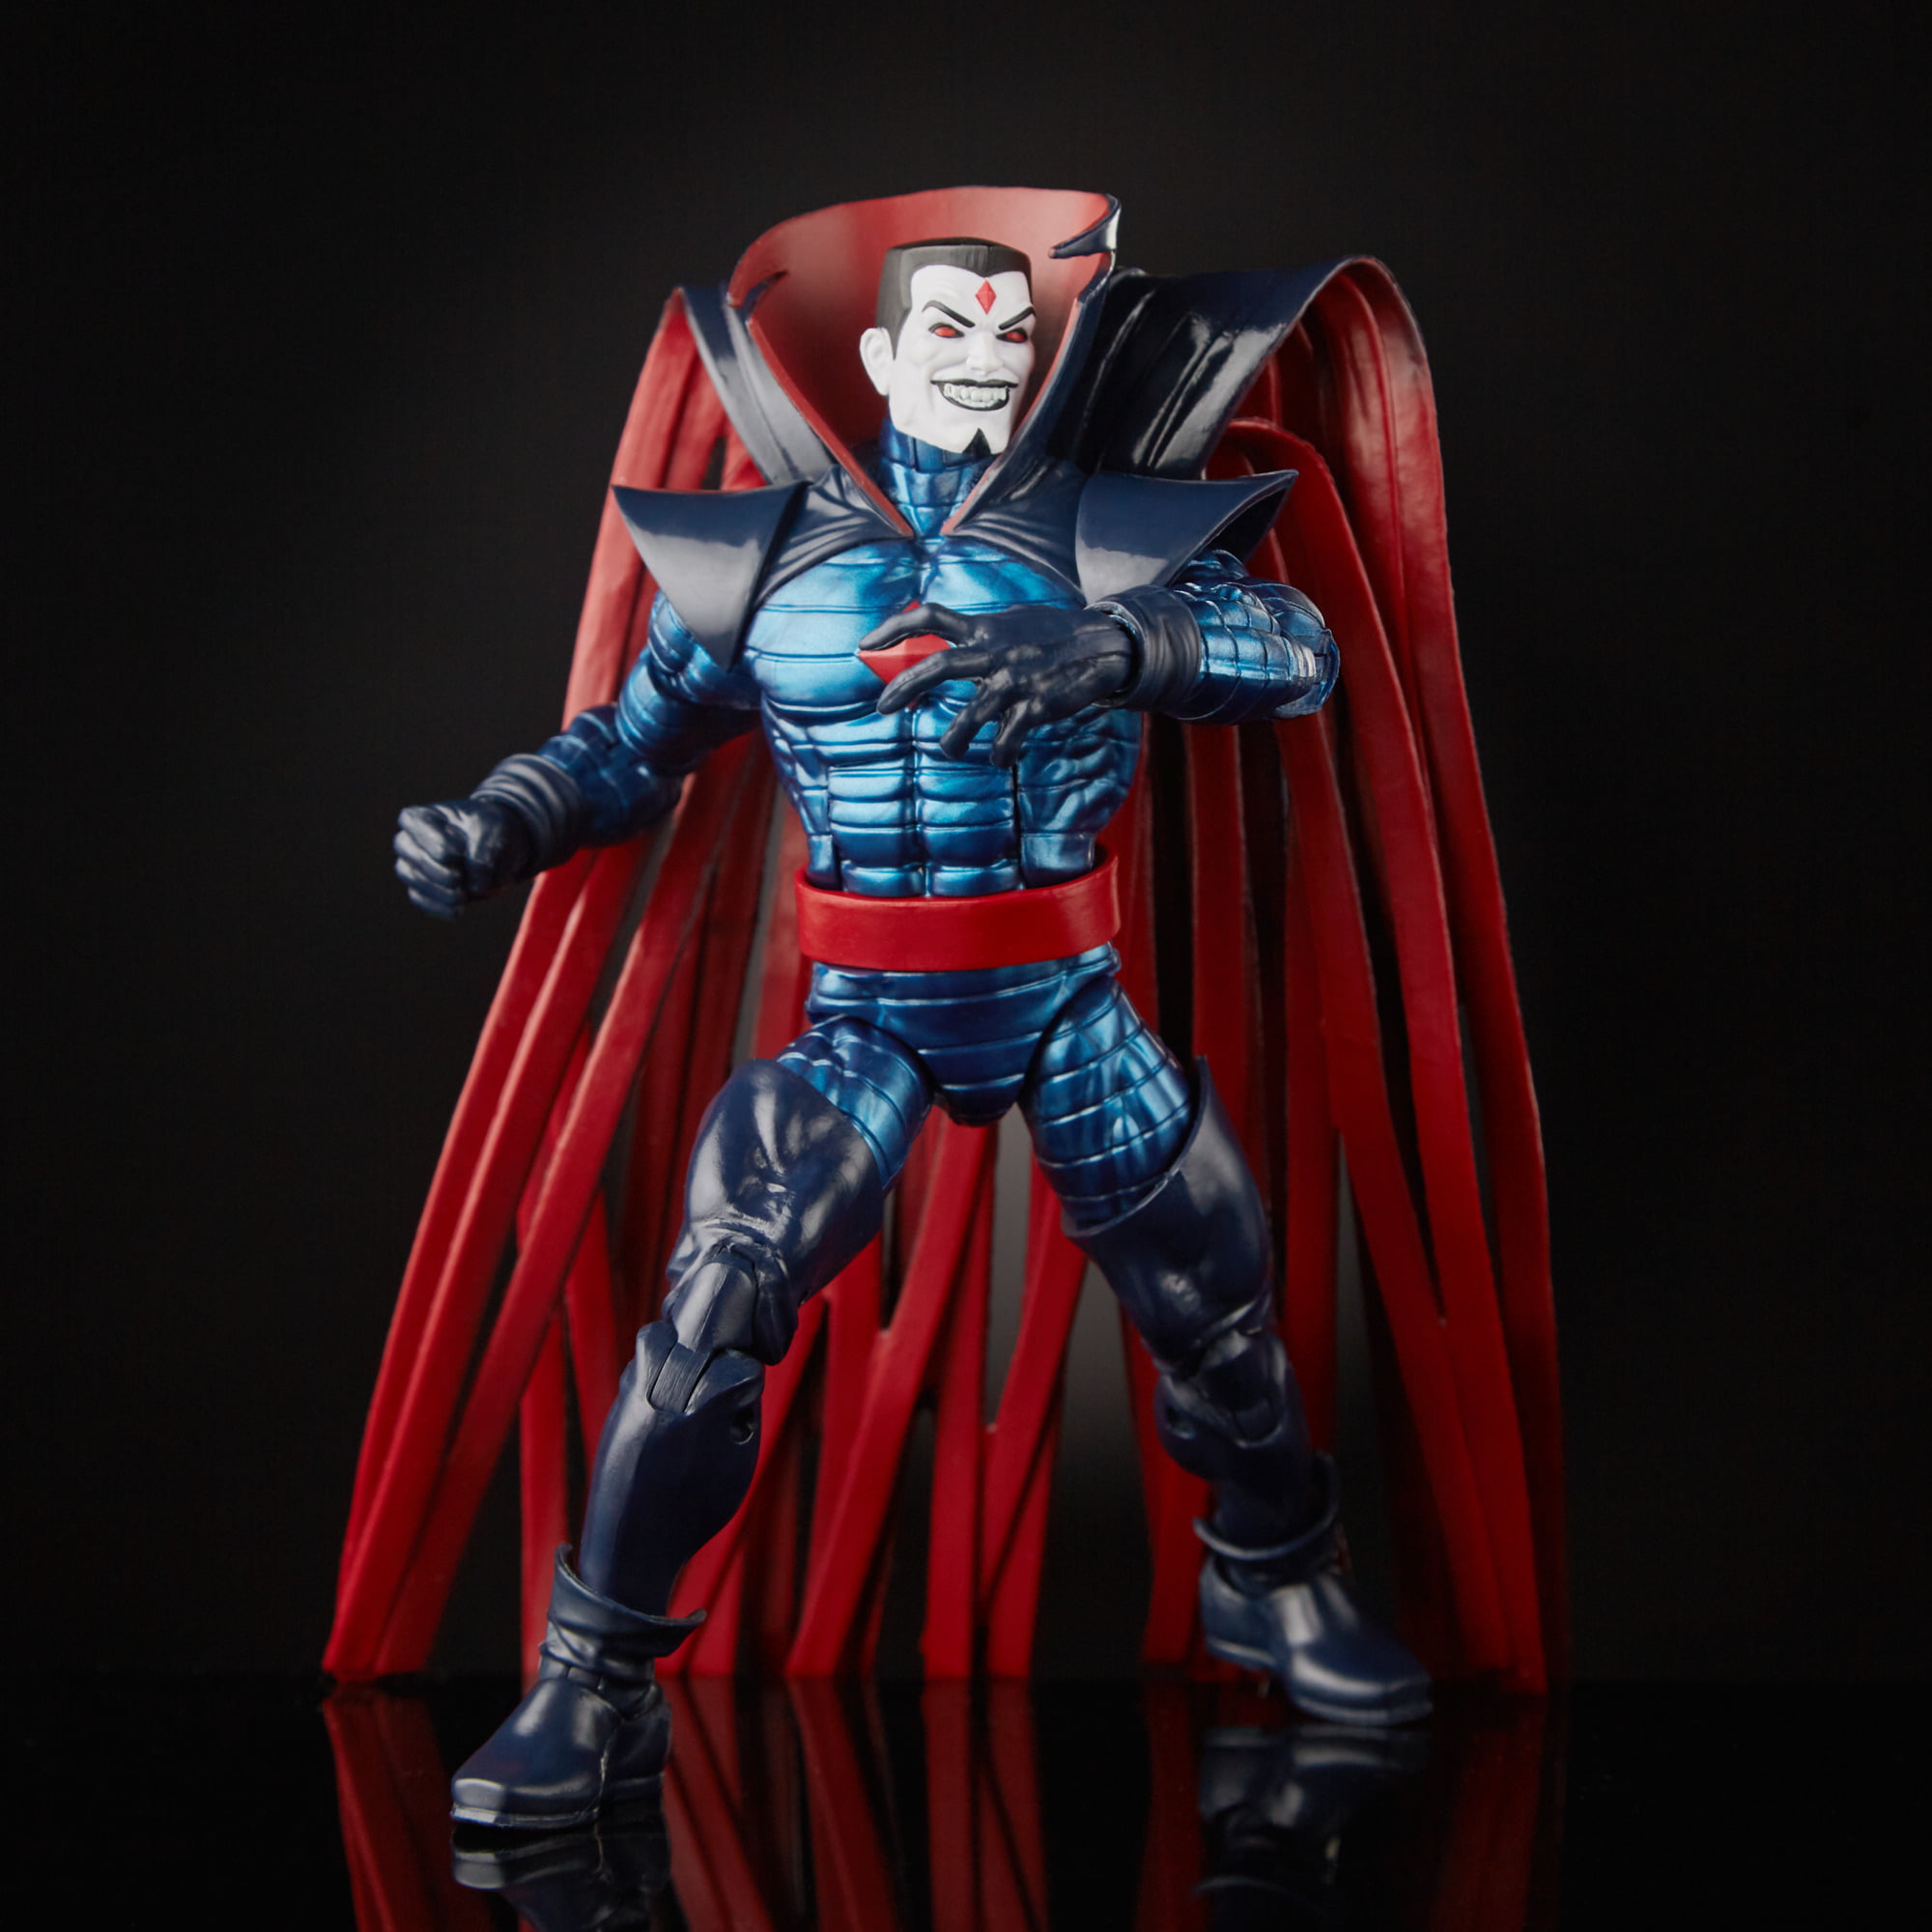 Marvel Classic E6116AS00 Legends Series 6" Collectible Mister Sinister Action Figure for sale online 